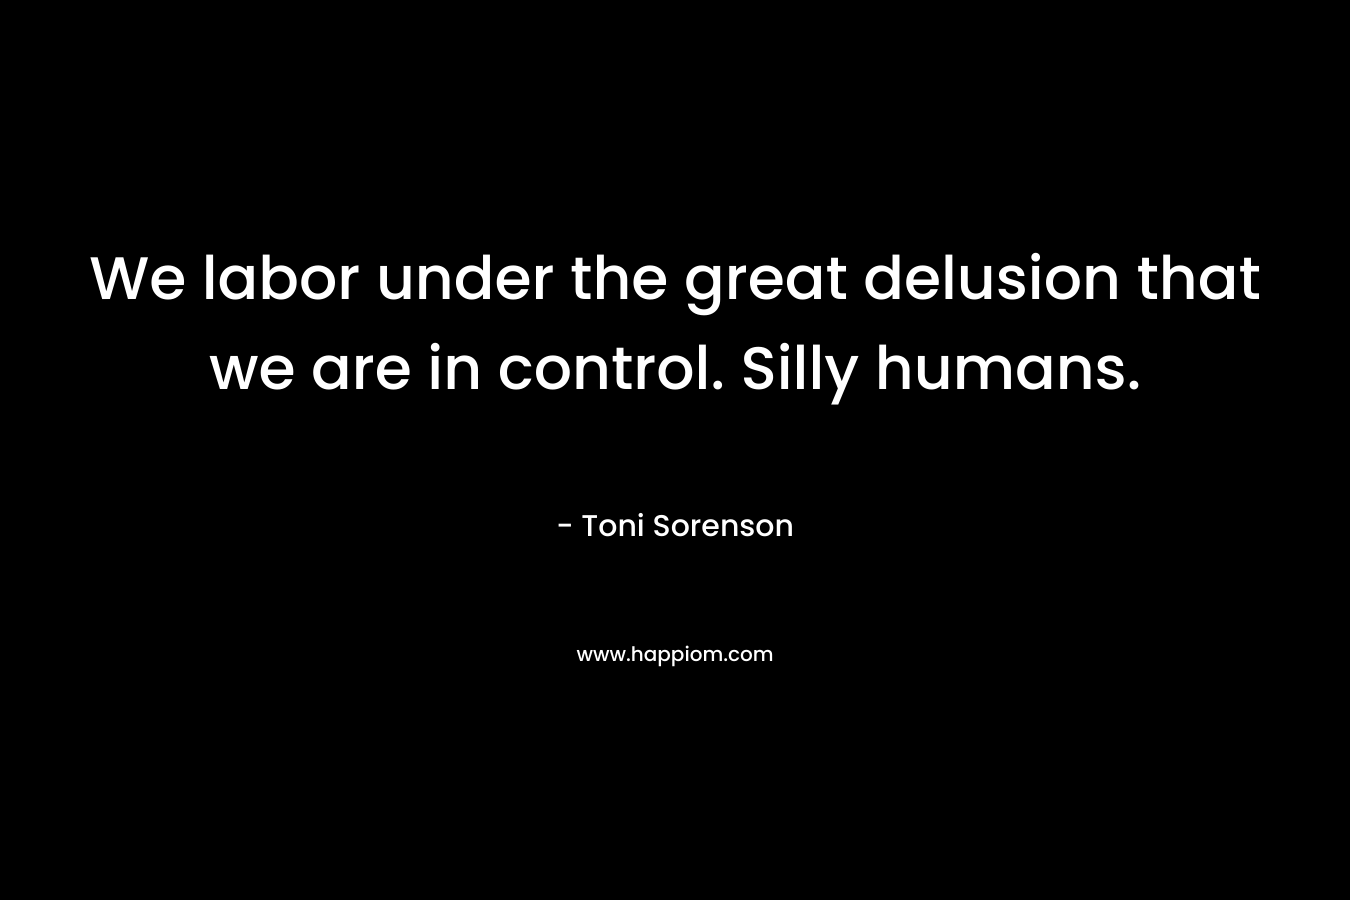 We labor under the great delusion that we are in control. Silly humans. – Toni Sorenson